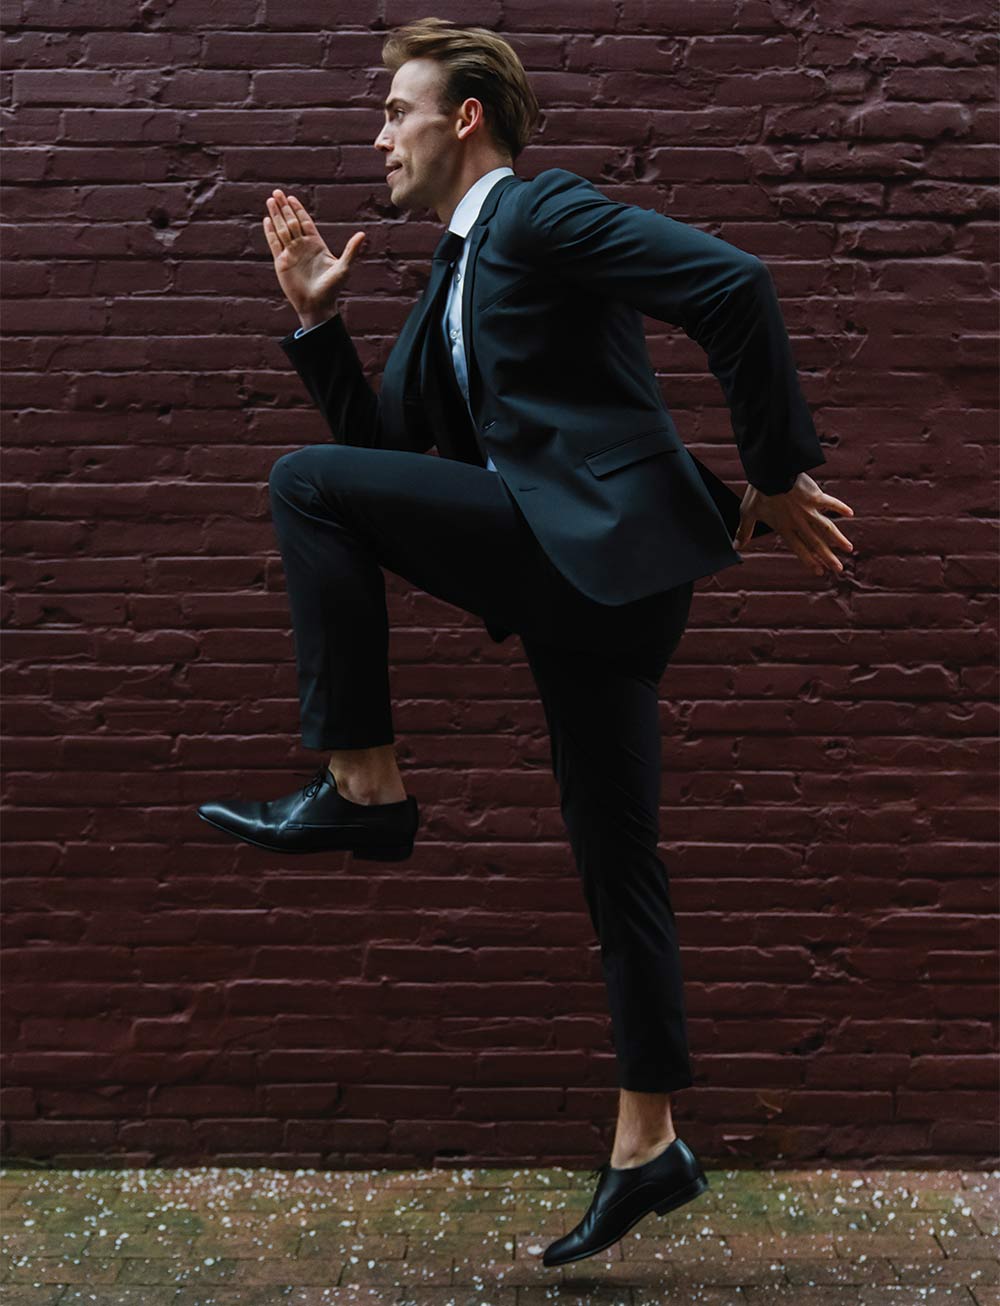 Connor Emery is a man in a nice suit with styled brown hair. He is suspended in the air in a running pose in front of a brick wall.